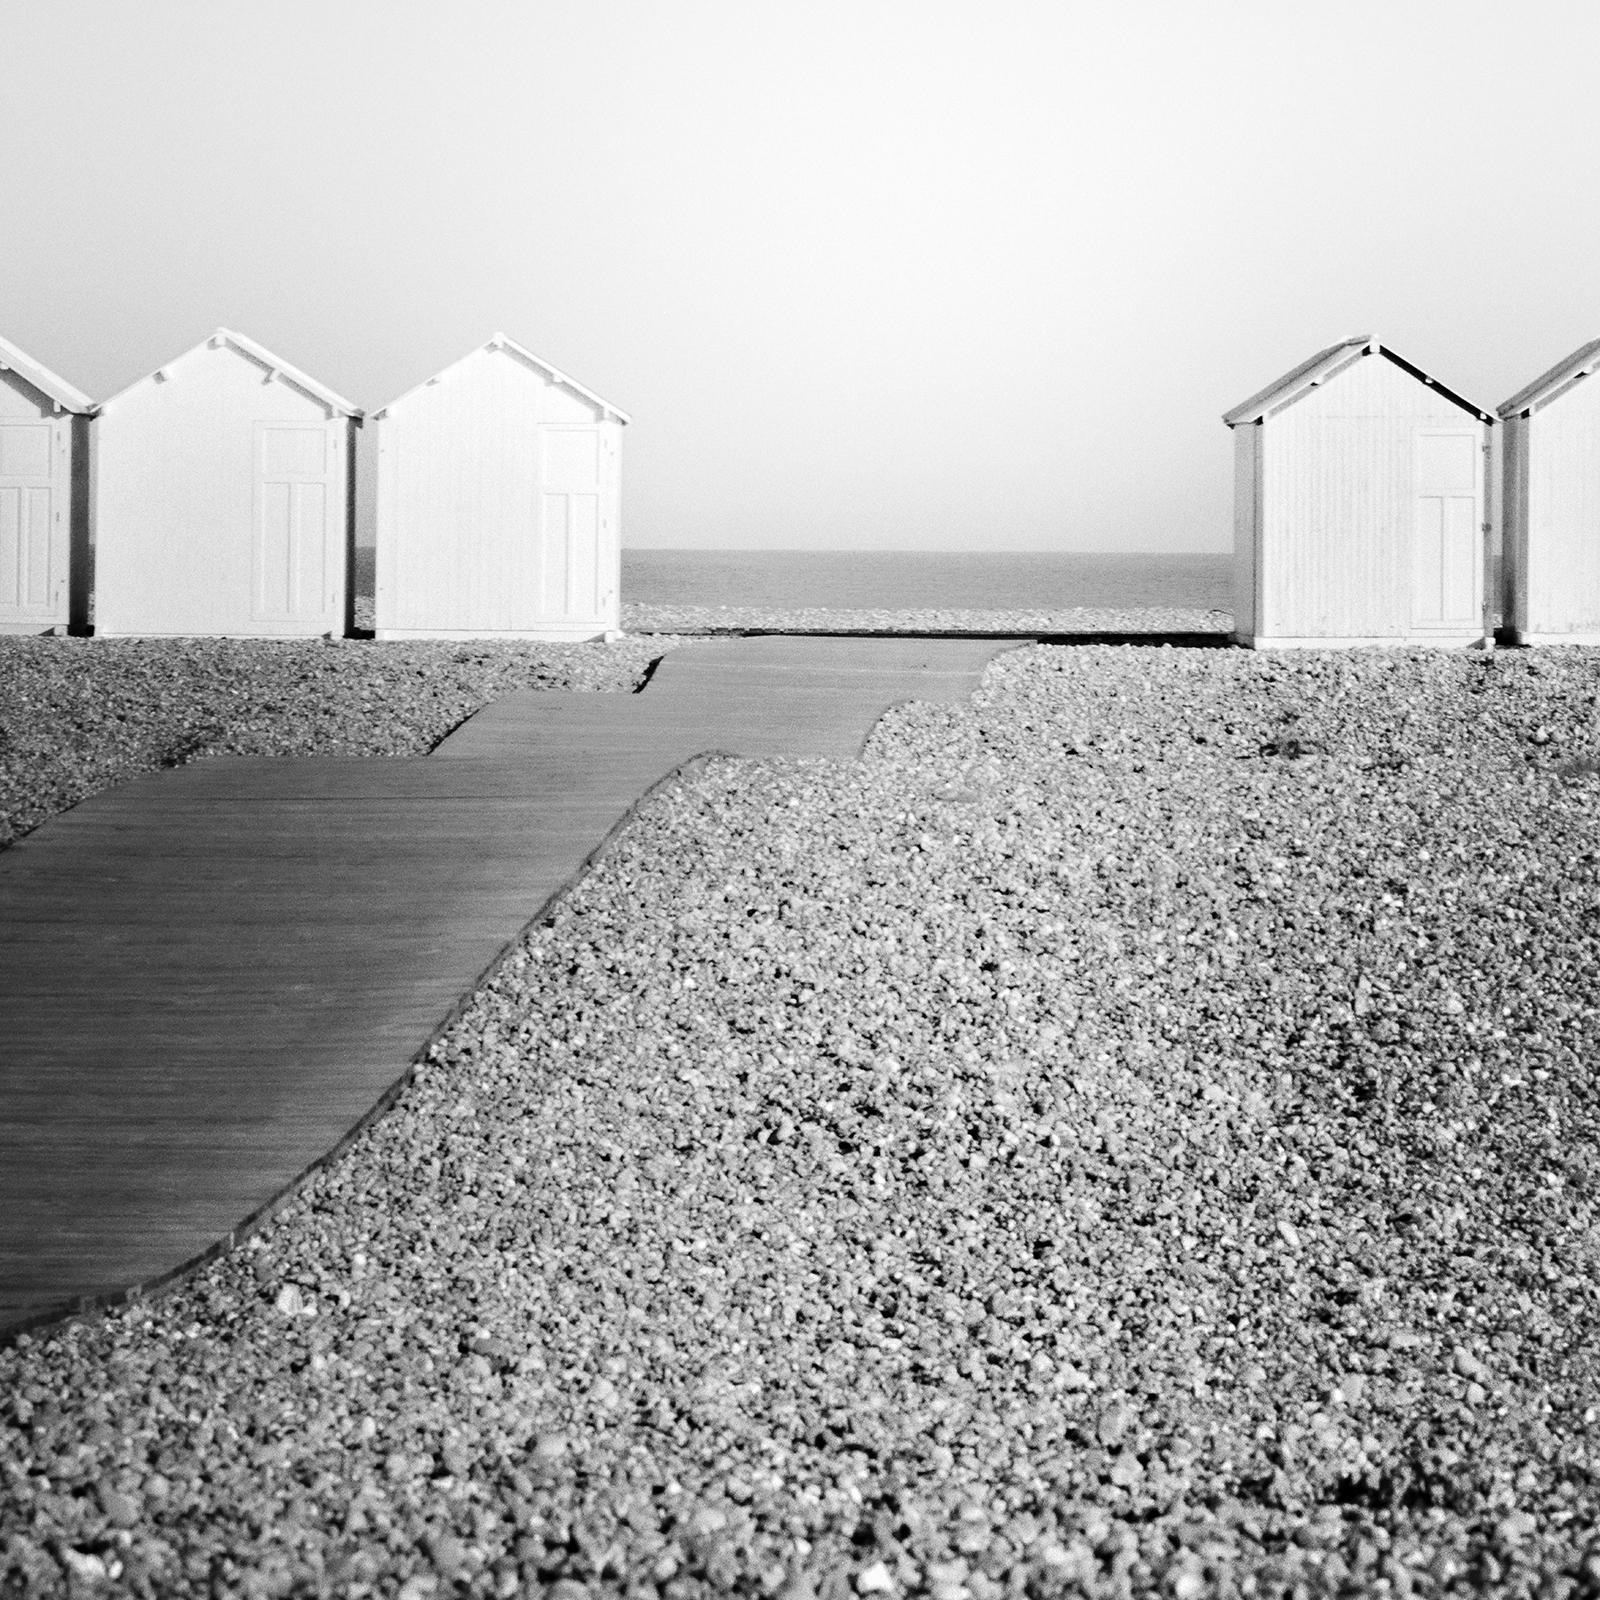 Wood Huts, Promenade, Rocky Beach, France, black and white landscape photography For Sale 4